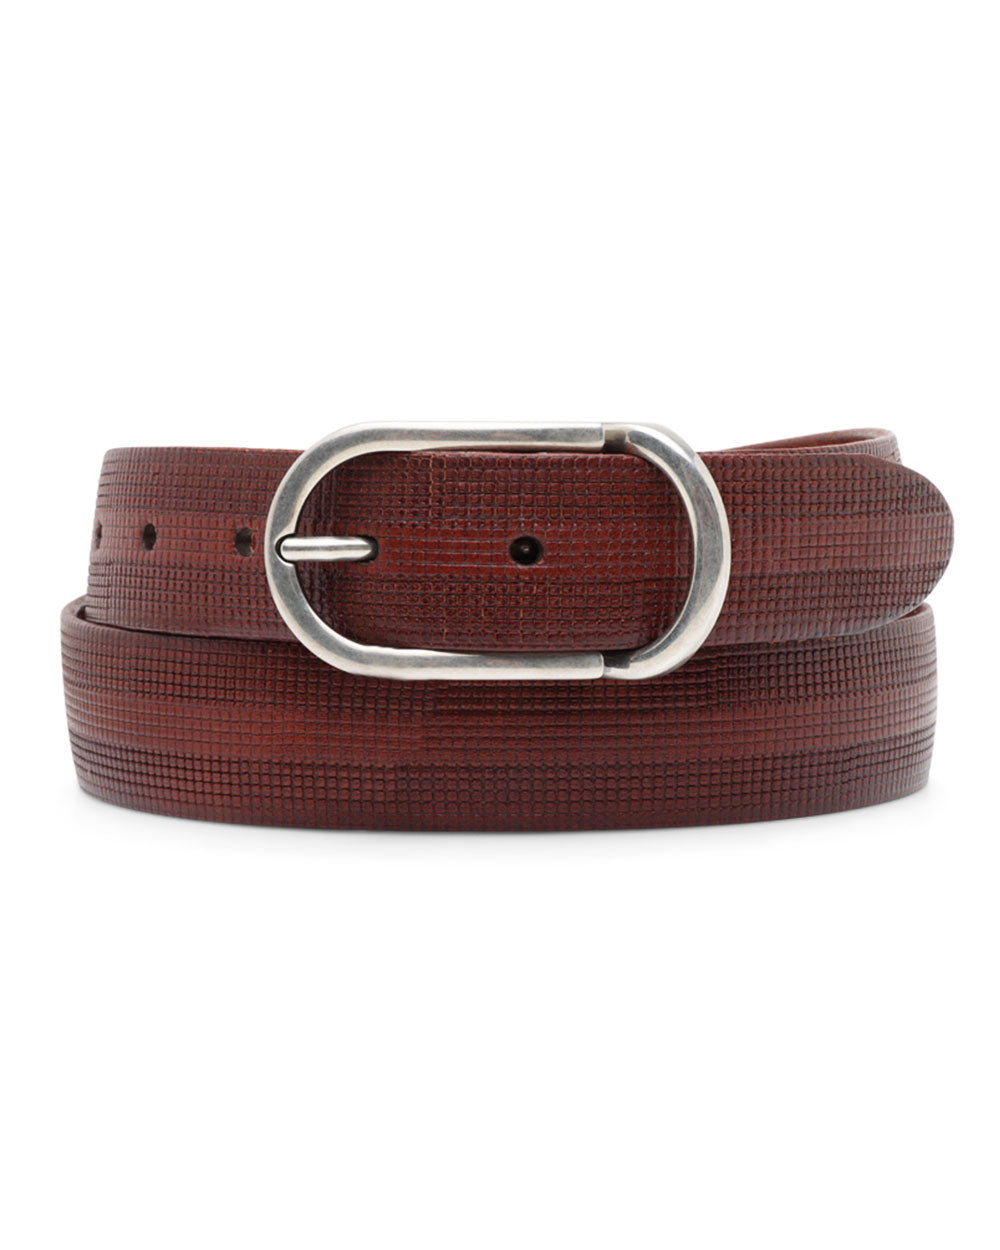 Textured Leather Belt in Tobacco